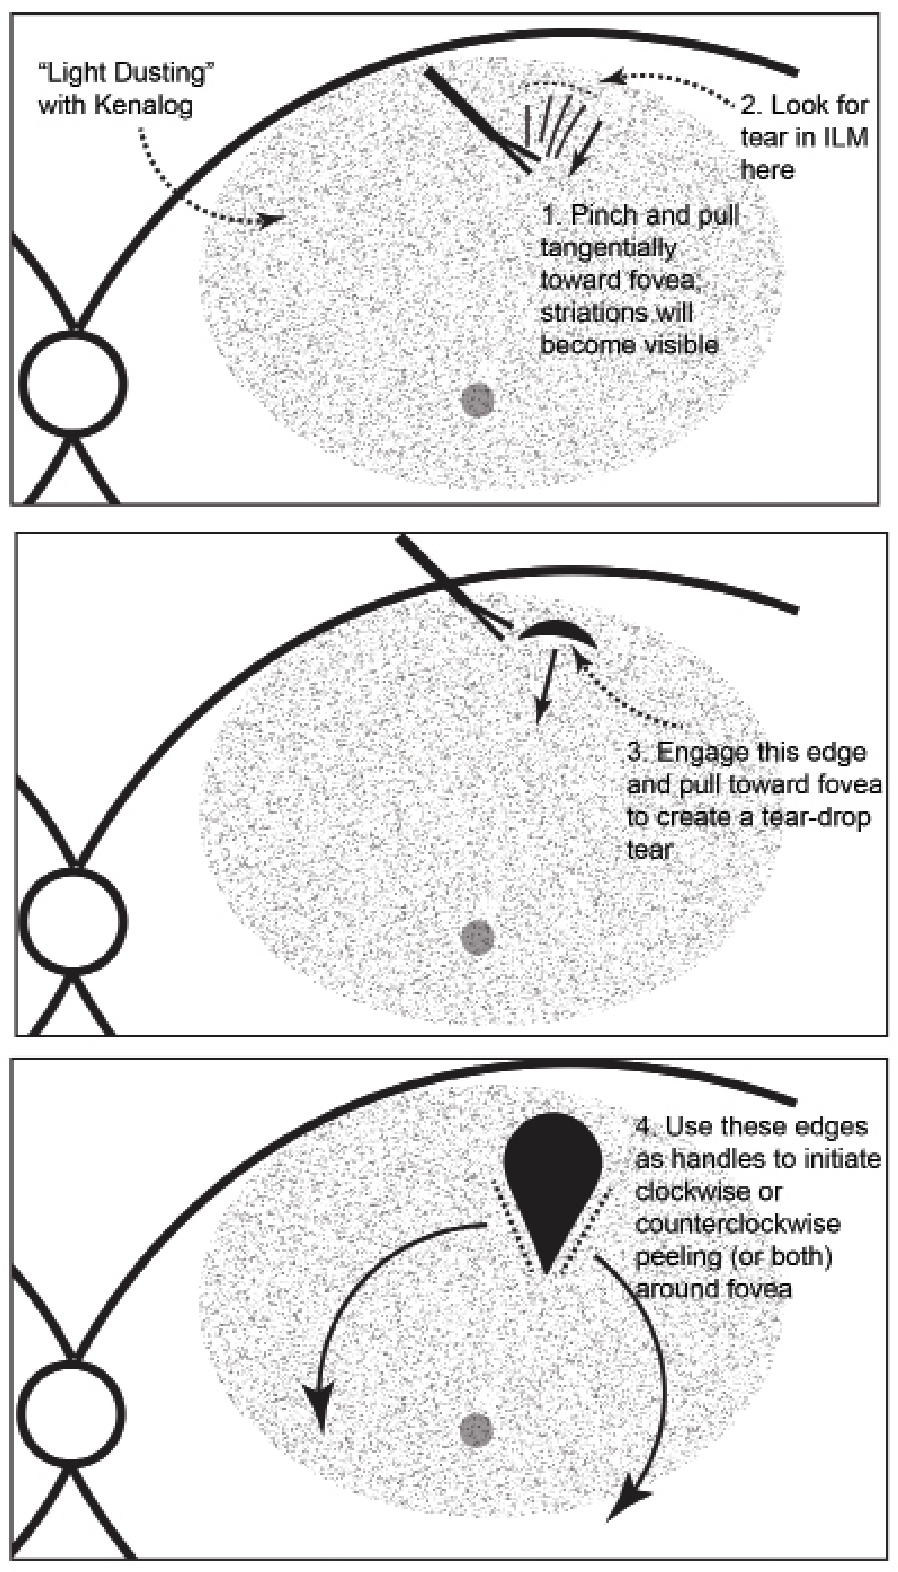 Key steps for peeling internal limiting membrane with Kenalog. Apply a light dusting of Kenalog on the macular surface (1:4 dilution in balanced salt solution). 1. Pinch a distal part of the ILM and pull it toward the fovea tangential to the retinal surface, identifying the tension lines from your instrument. 2. Look for a small rip in the ILM behind the tension line. 3. Release the forceps, grab the newly created torn edge of ILM (this step reduces the risk of pulling at the nerve fiber layer) and pull toward the fovea to create a teardrop-shaped window. 4. Use the lateral edges of the teardrop to serve as handles for extending wide flaps around the entire macular center. 